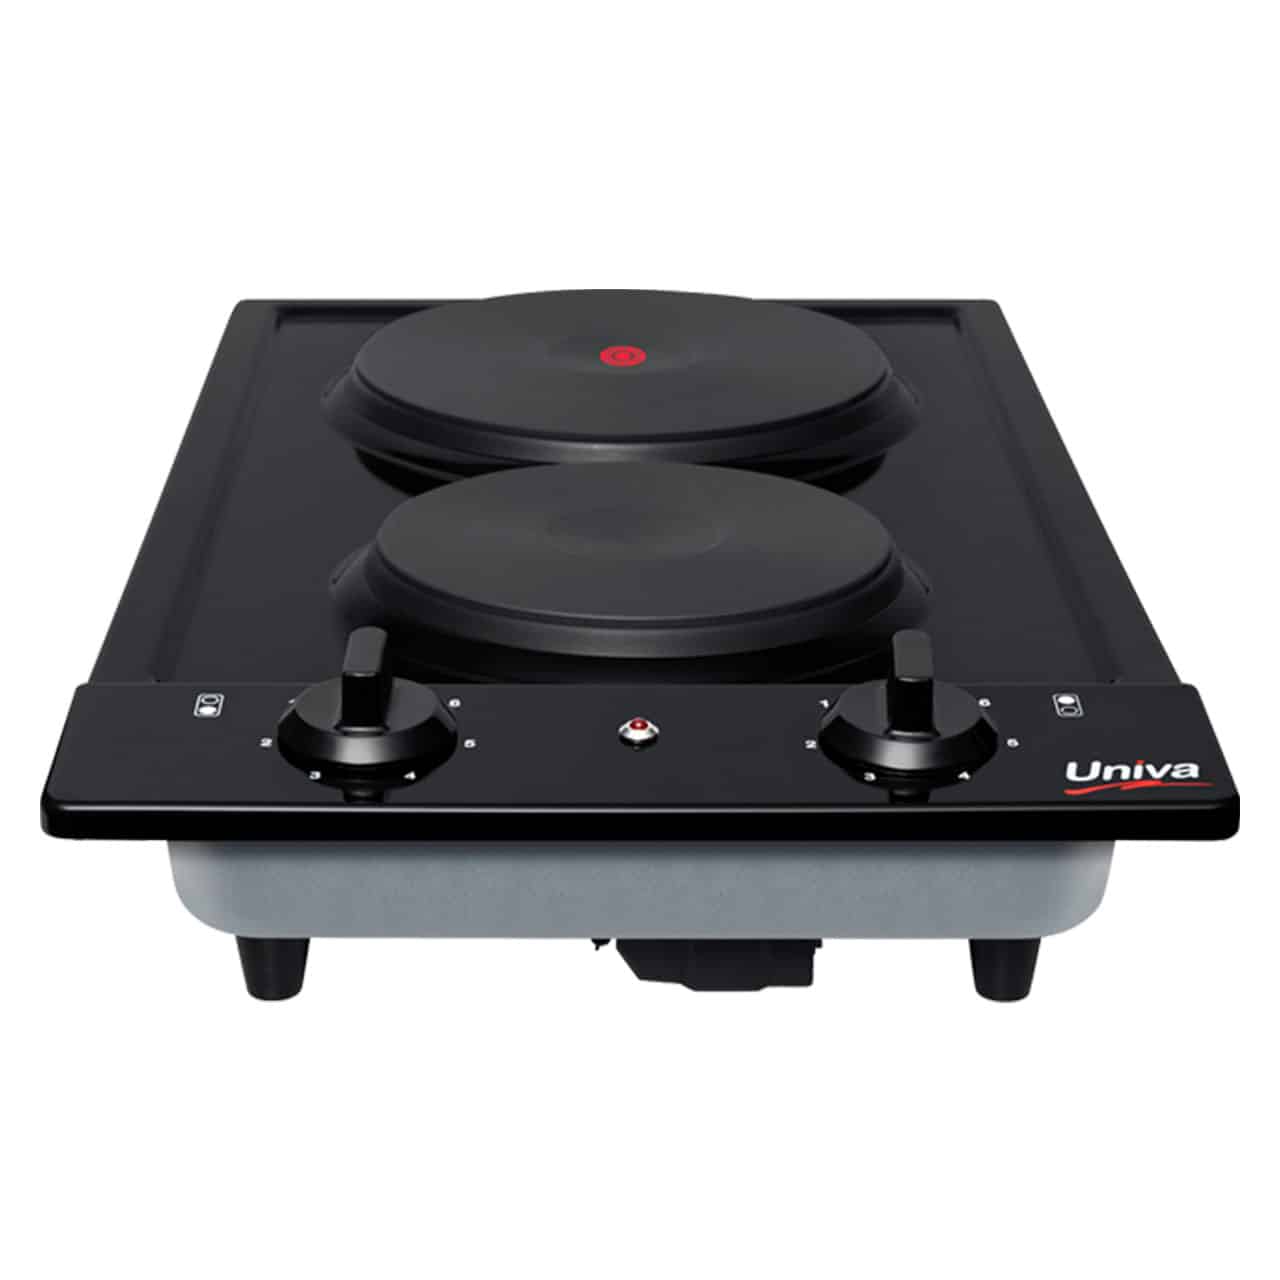 Univa - 2 Plate Solid Hob with Control Panel - UDH02B